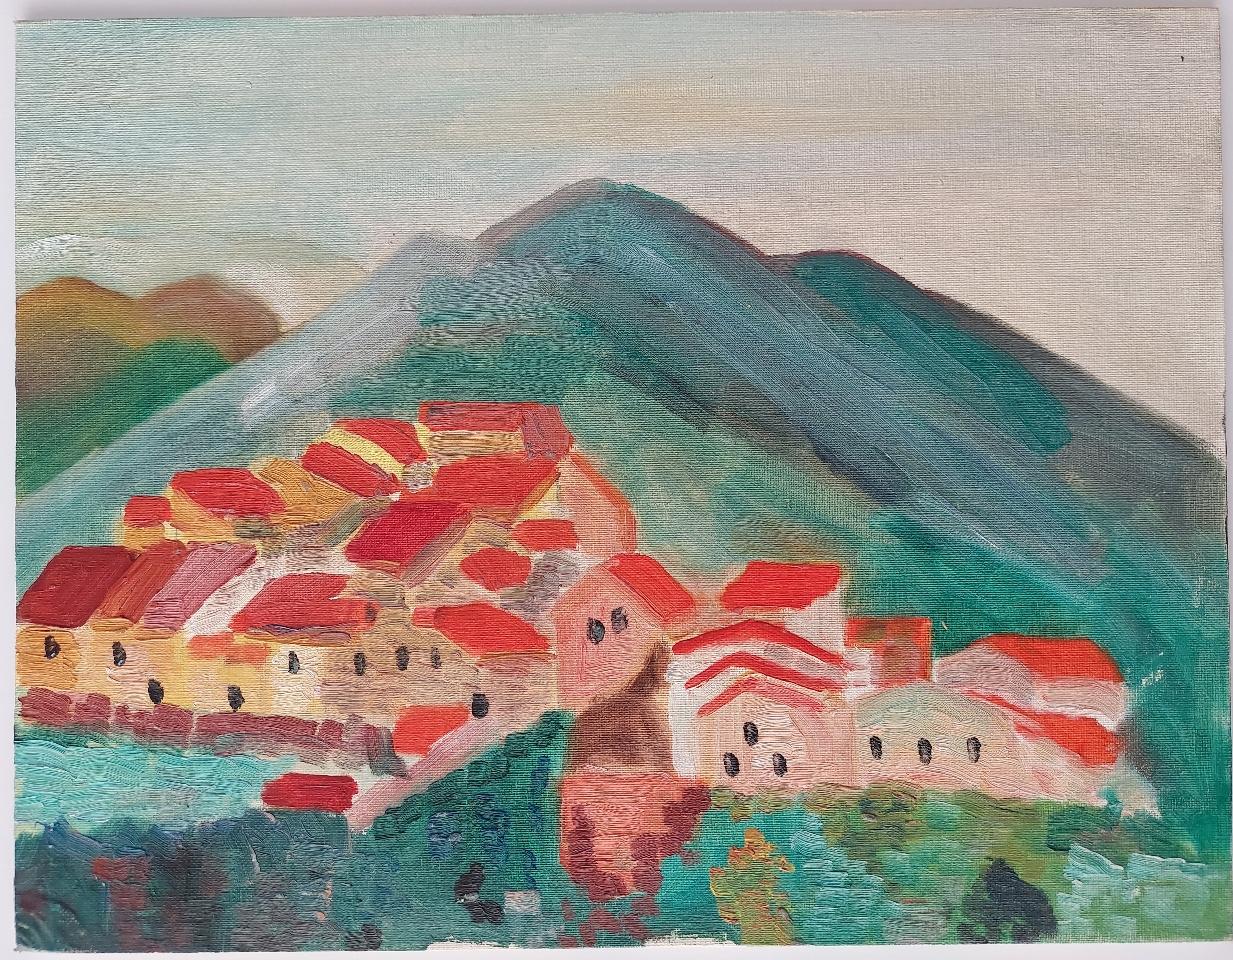 A Red Roofed Village in France
by Bernard Labbe (French mid 20th century)
original watercolor, ink and gouache on paper
size: 13.75 x 10.6 inches
unsigned, stamped verso
condition: very good and ready to be enjoyed

provenance: the artists